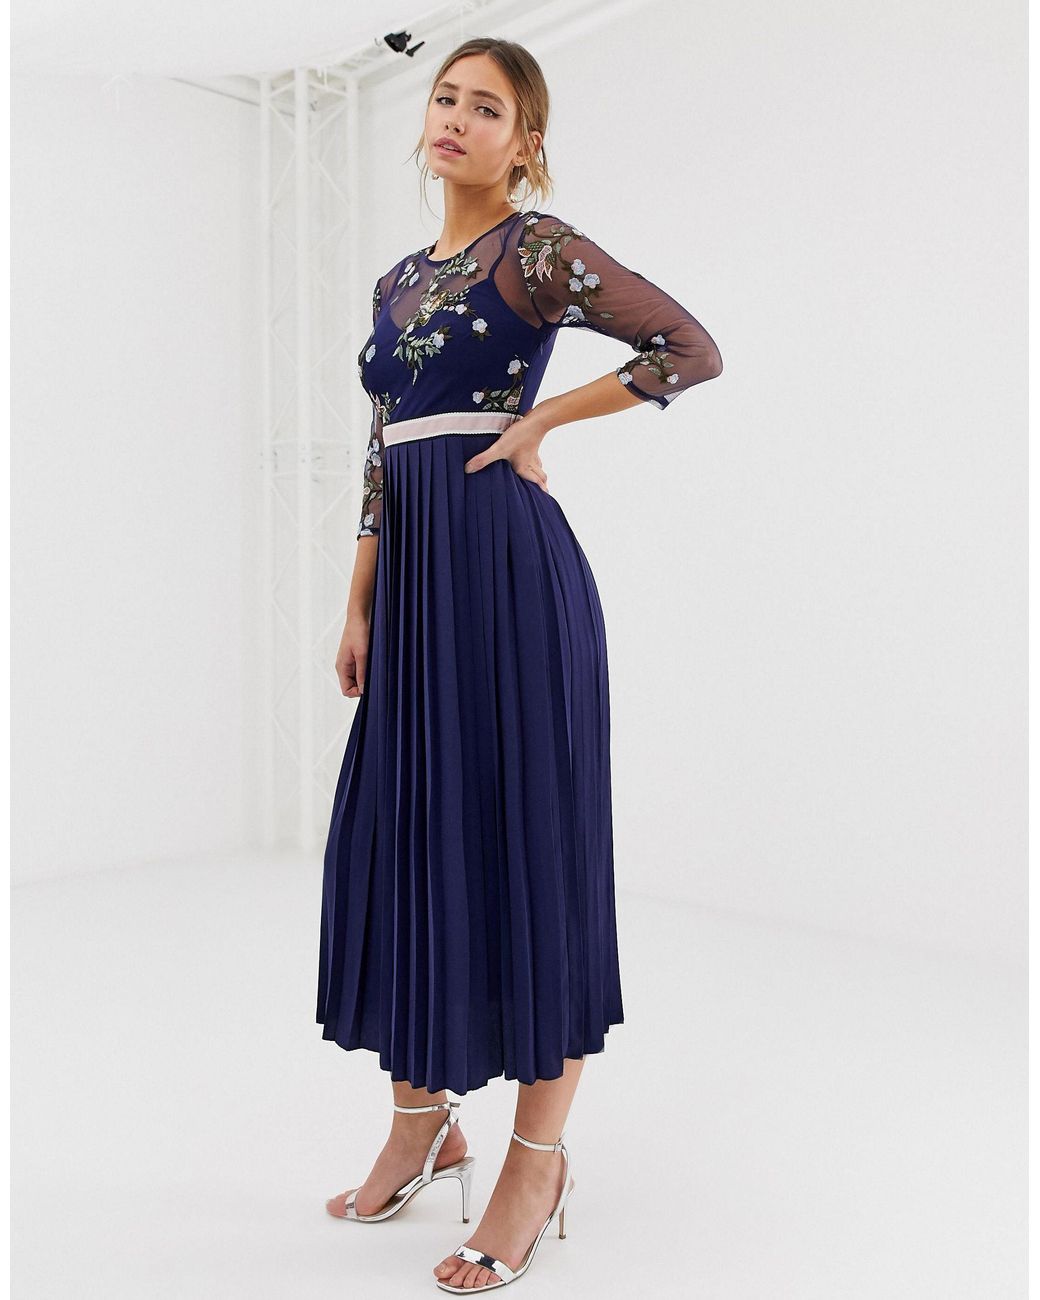 Little Mistress Lace Embroidered Top Midi Dress in Navy (Blue) - Lyst